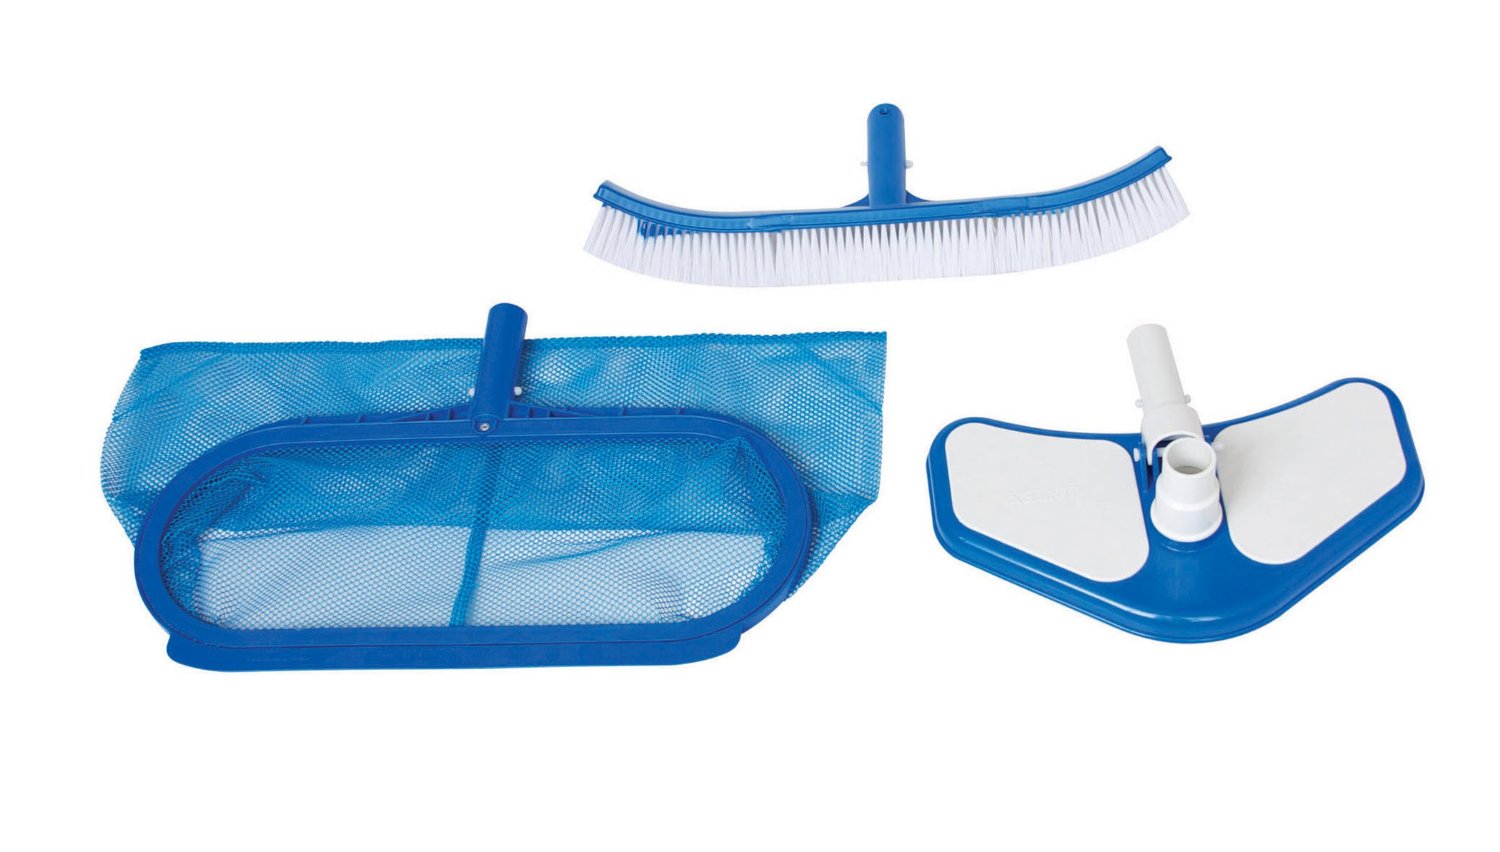 Intex Deluxe Cleaning Kit for Pools